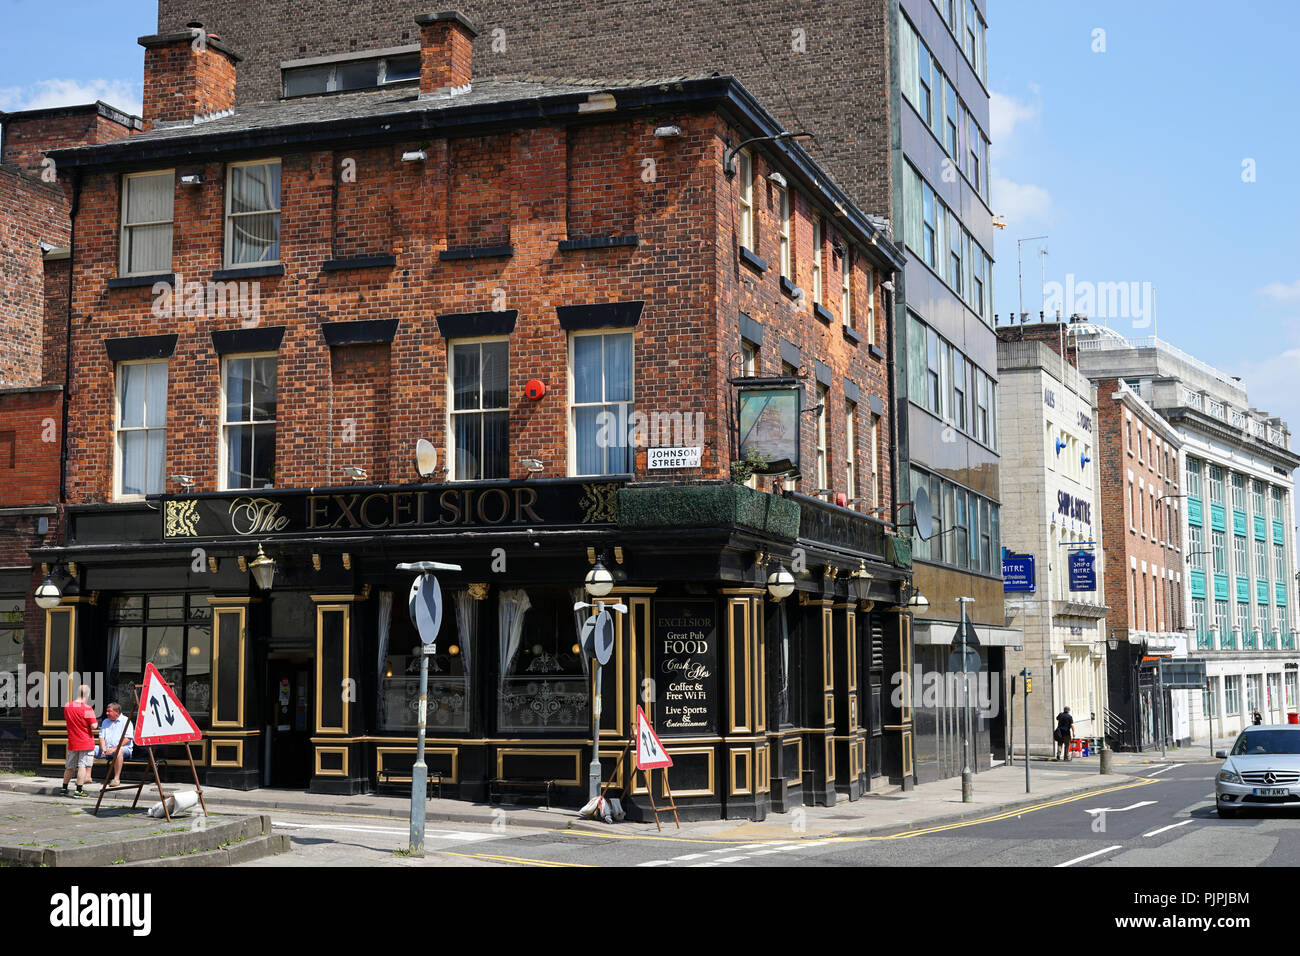 The Excelsior pub, Dale Street, Liverpool. On the corner of Johnson st and Dale St, Image taken in May 2018. Stock Photo